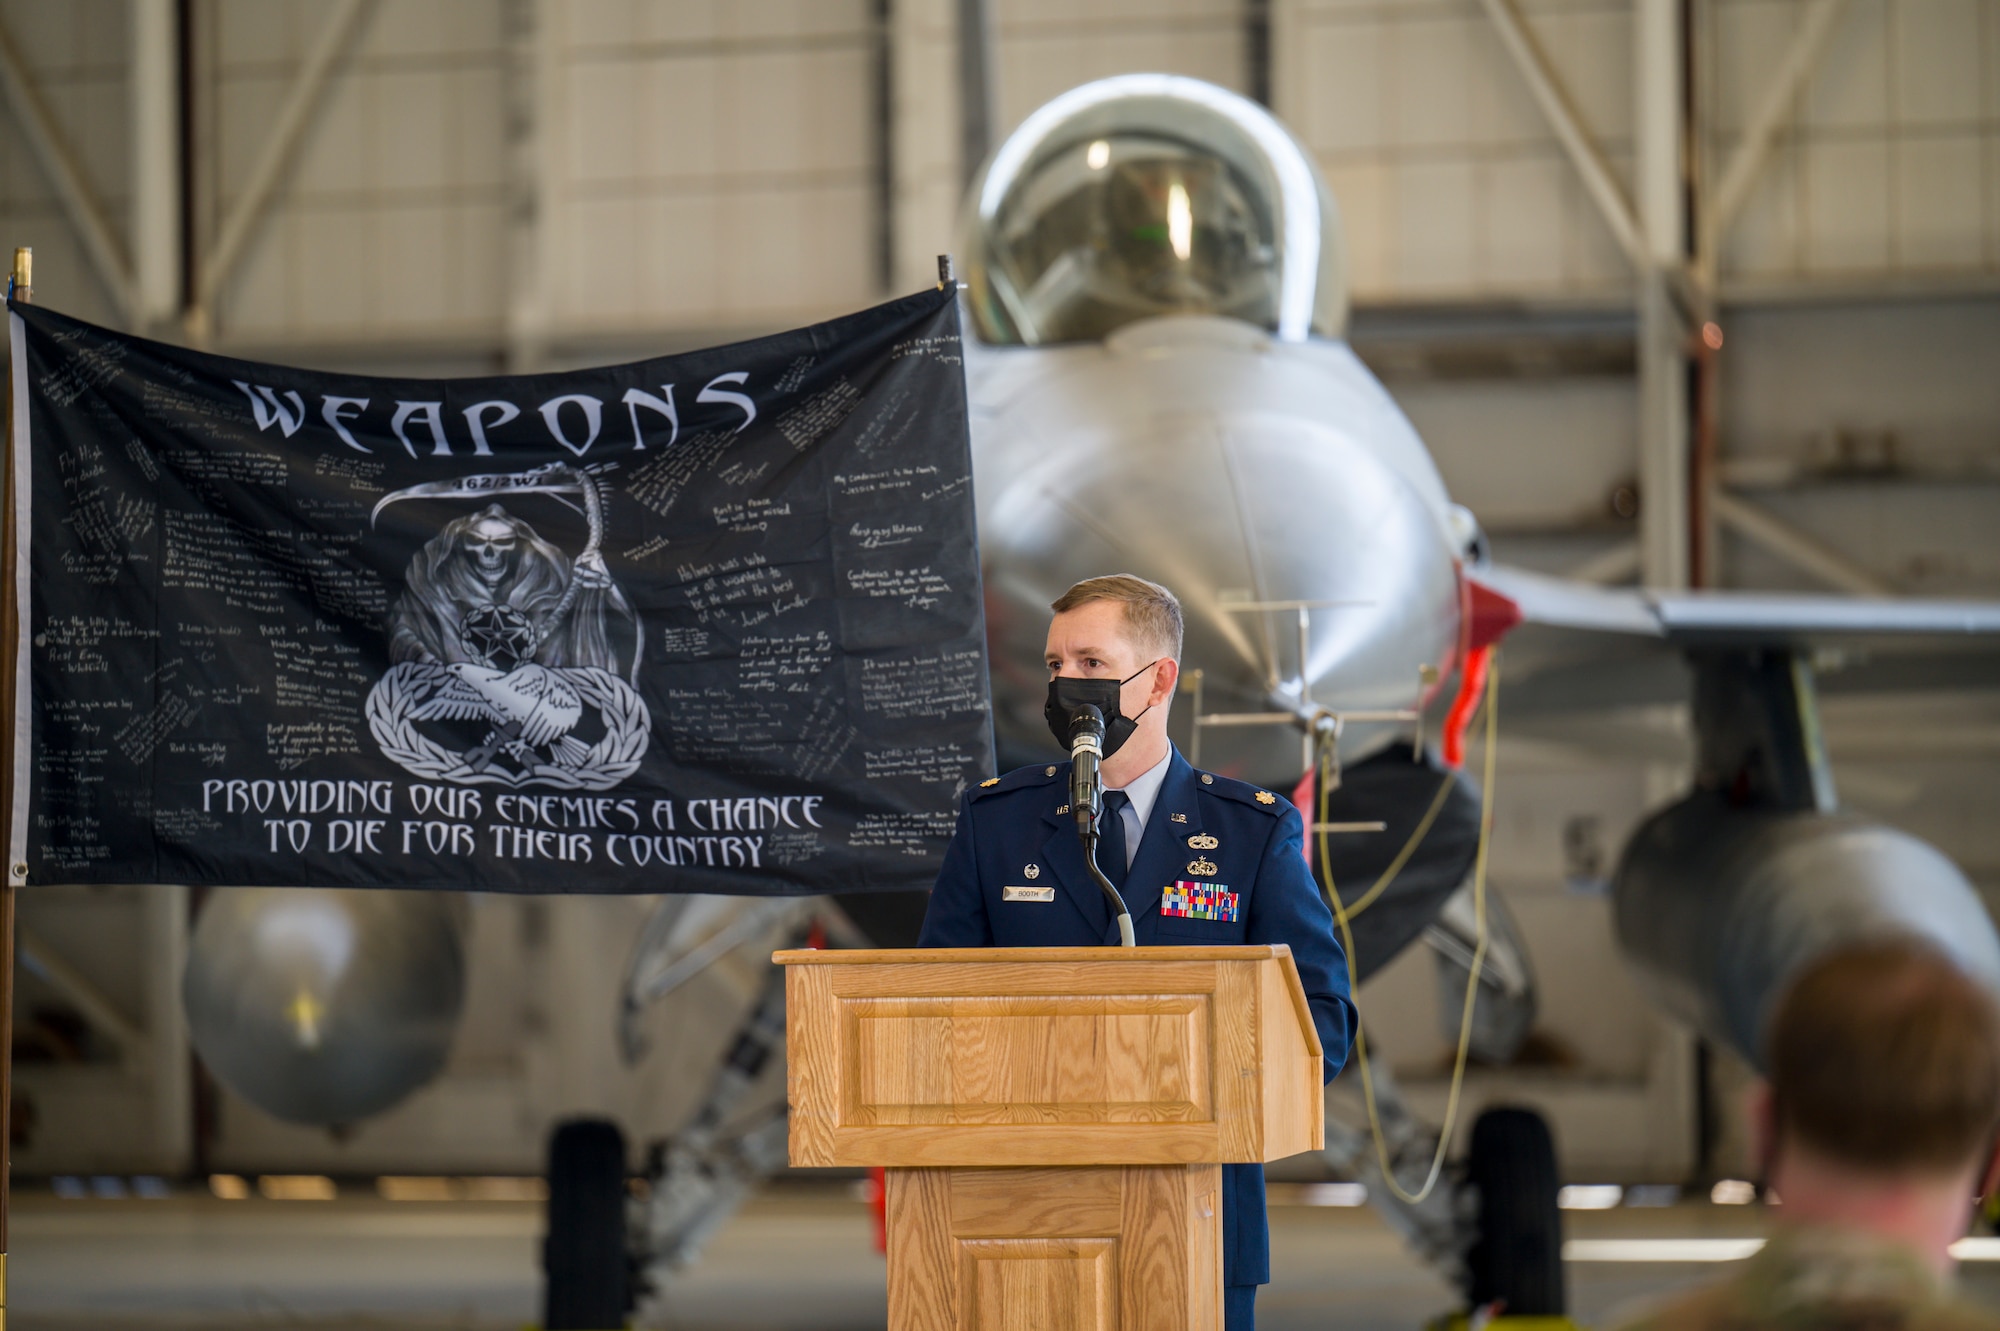 Maj. Robert Booth, 412th Aircraft Maintenance Squadron Commander, offers his remarks during a memorial ceremony for Senior Airman Robert Holmes, Jr., at Edwards Air Force Base, California, Jan. 29. Holmes was assigned to the 416th Aircraft Maintenance Unit Weapons Section and passed away Jan. 13. Holmes was awarded Air Force Achievement Medal posthumously. (Air Force photo by Giancarlo Casem)